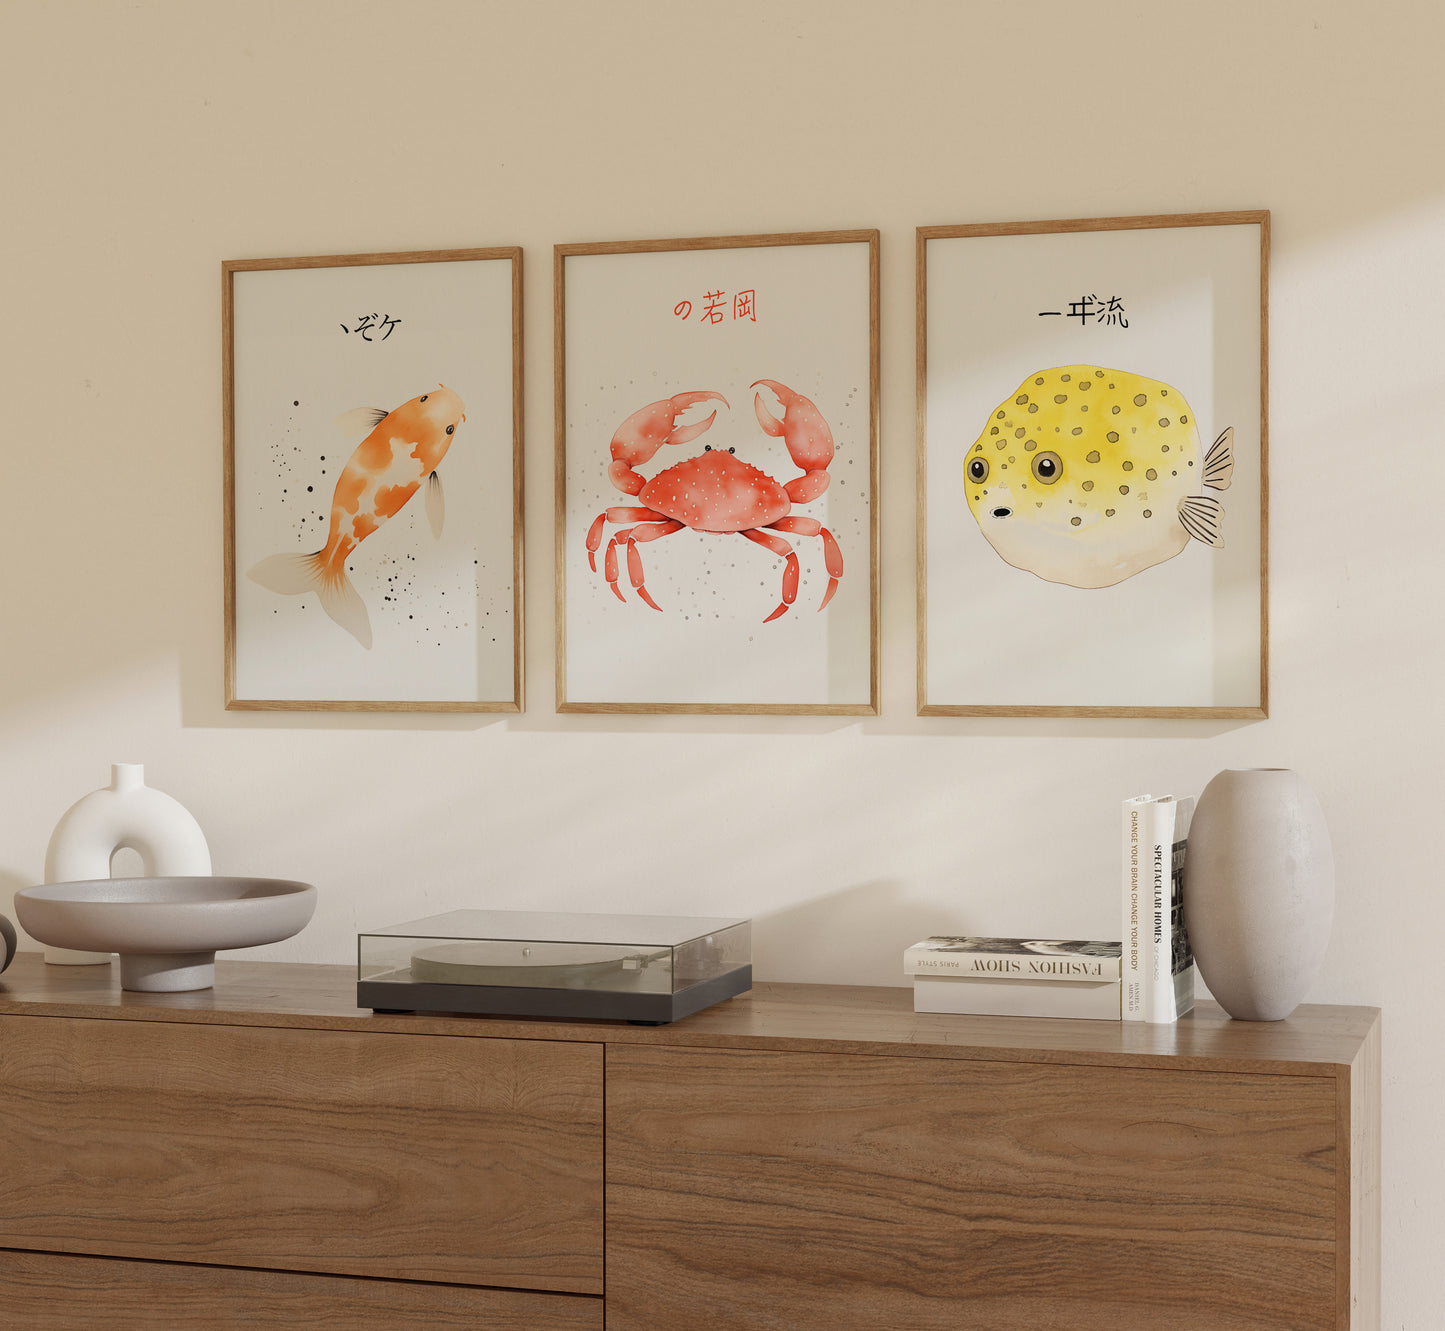 Three framed illustrations of sea creatures—a koi fish, a crab, and a pufferfish—on a wall above a wooden sideboard.